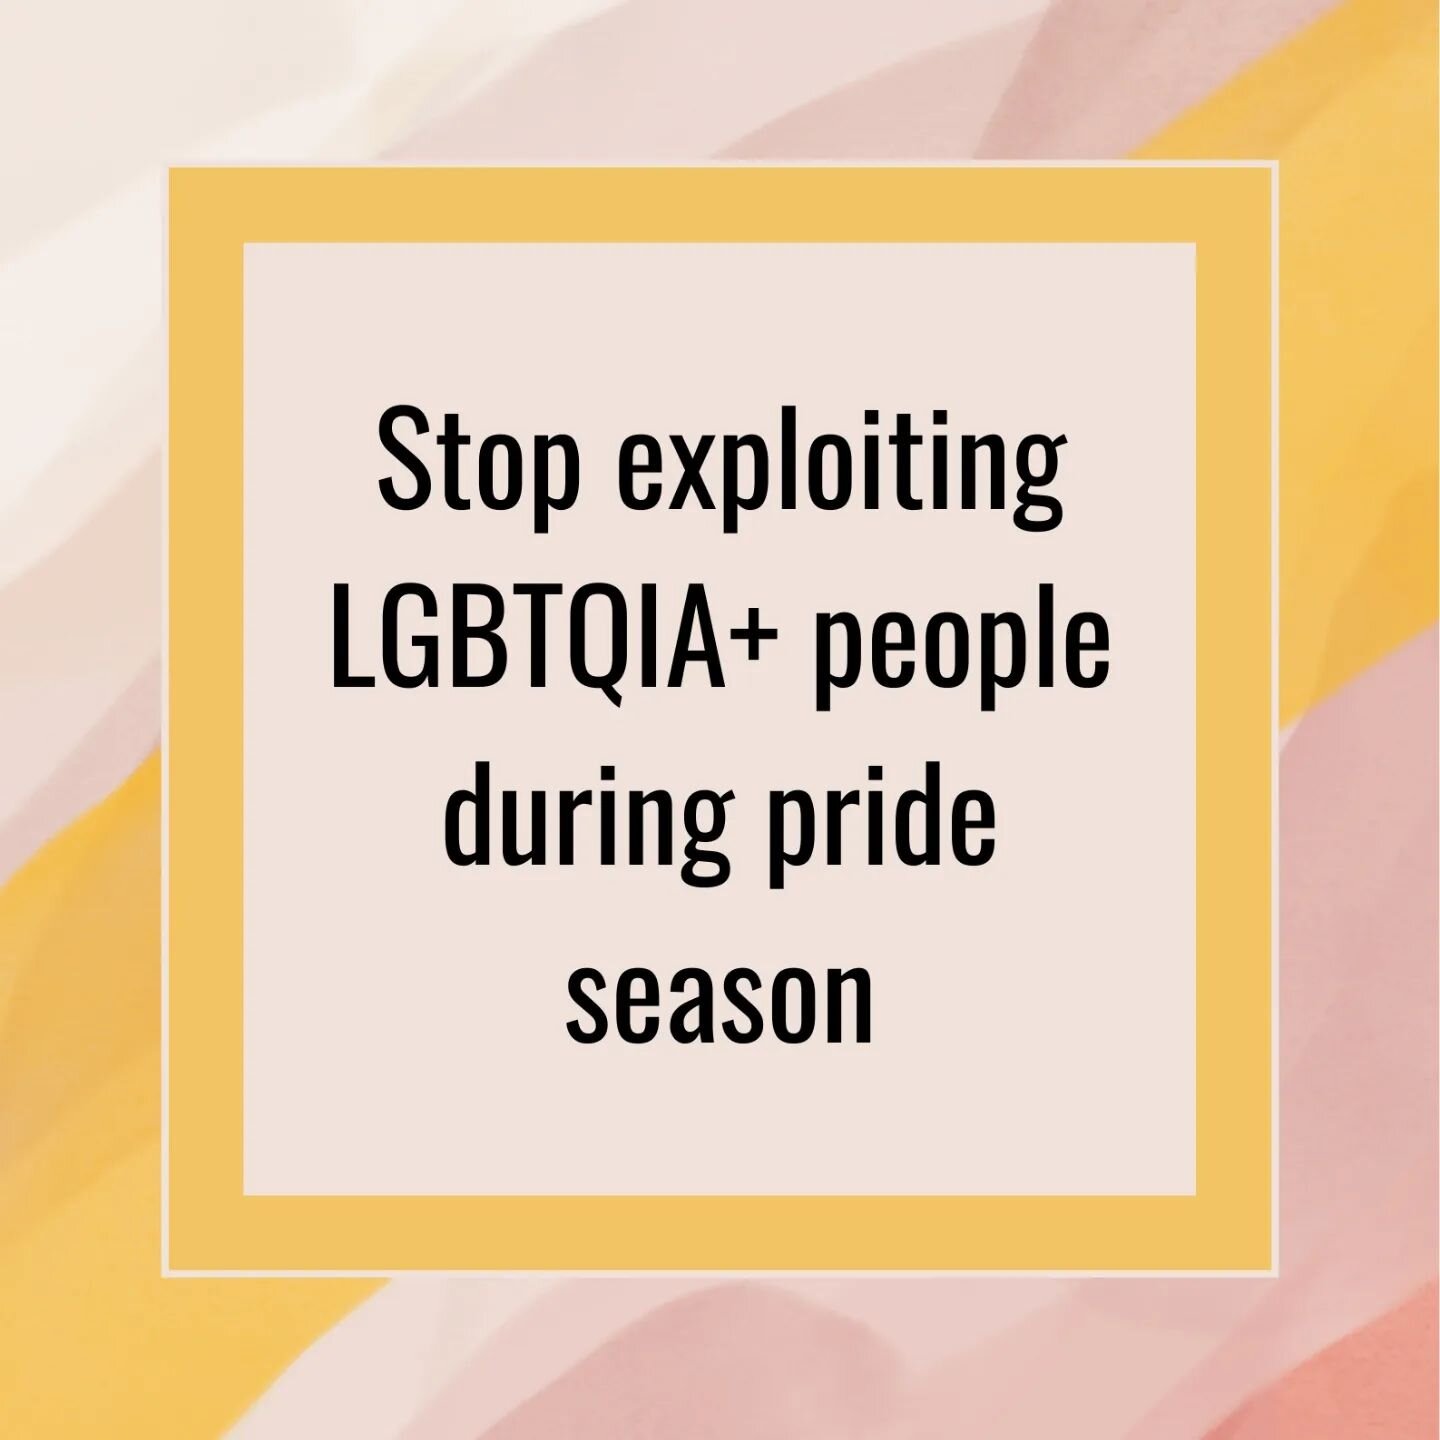 Stop exploiting LGBTQIA+ people during pride season!

This is not an exhaustive list of BIPOC charities you should support all year round, there are many more!

@bisialimifoundation 
@africanrainbowfamily 
@transwaveja 
@ gaysians
@imaanlgbtqi 
@ aca